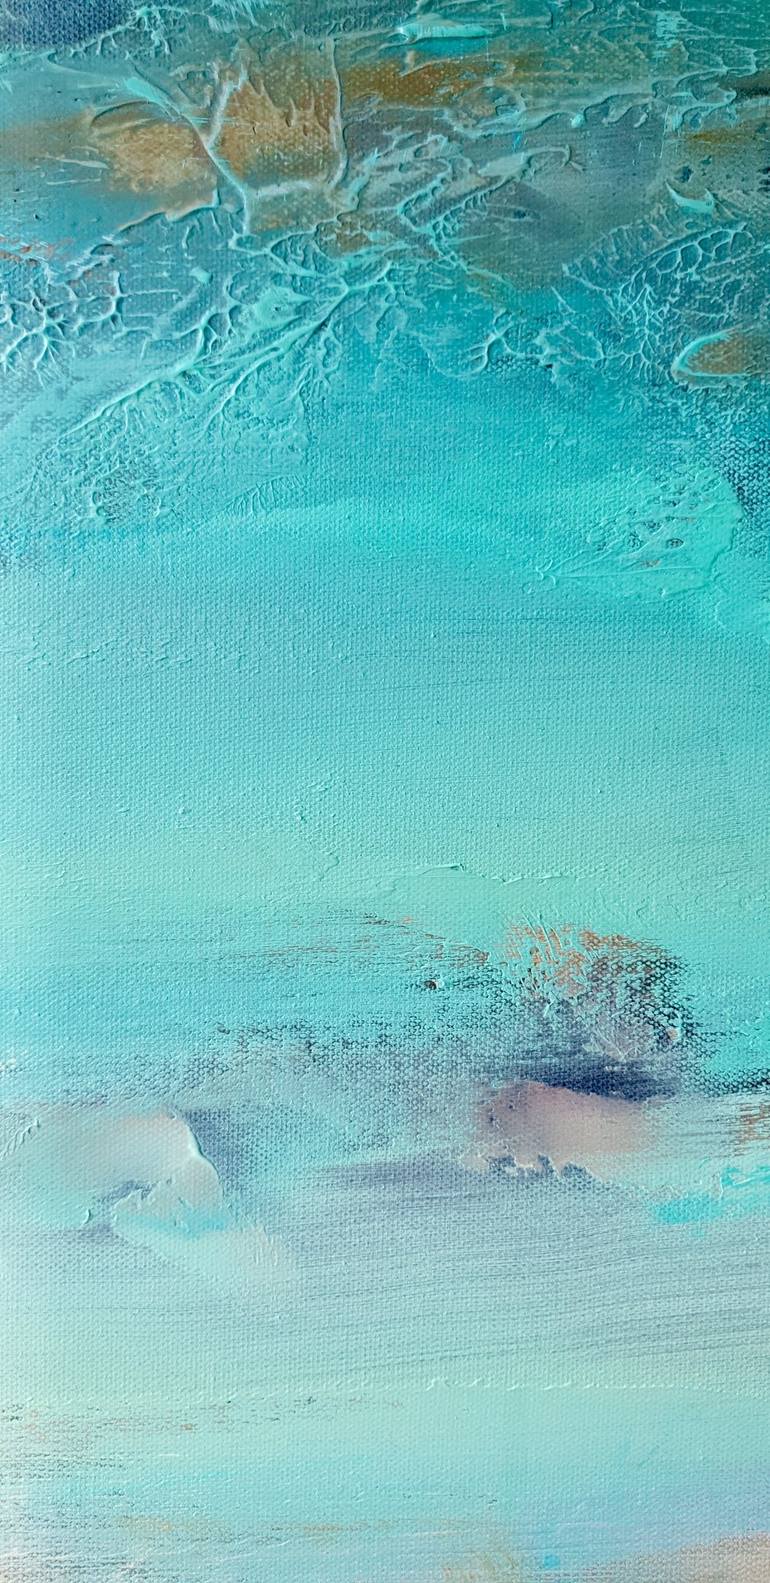 Original Abstract Beach Painting by Holly Playford